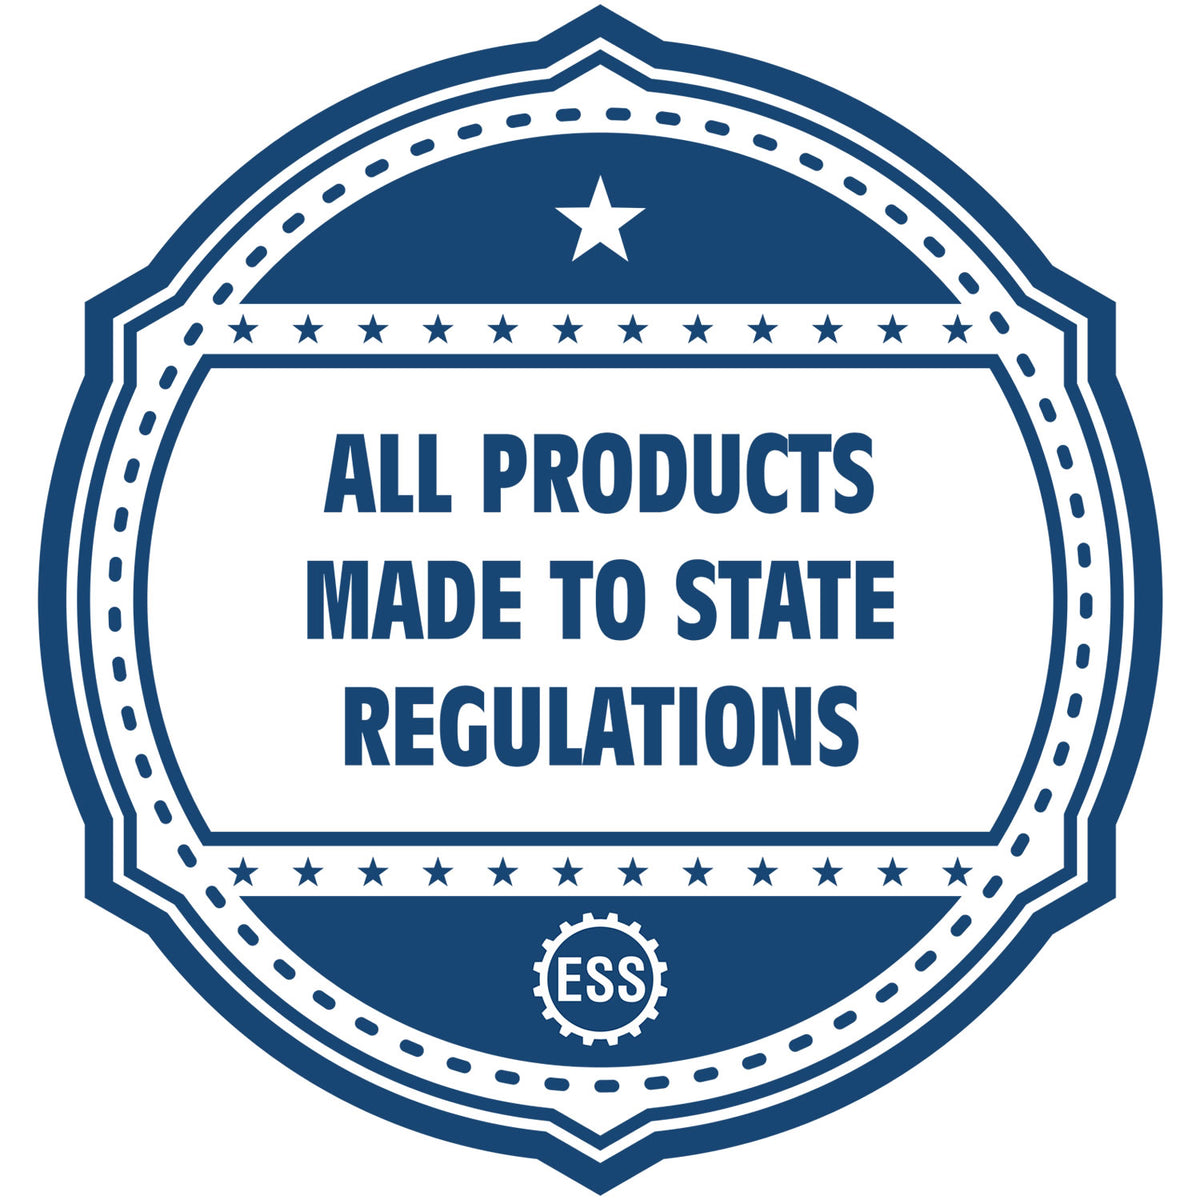 An icon or badge element for the Premium MaxLight Pre-Inked Vermont Engineering Stamp showing that this product is made in compliance with state regulations.